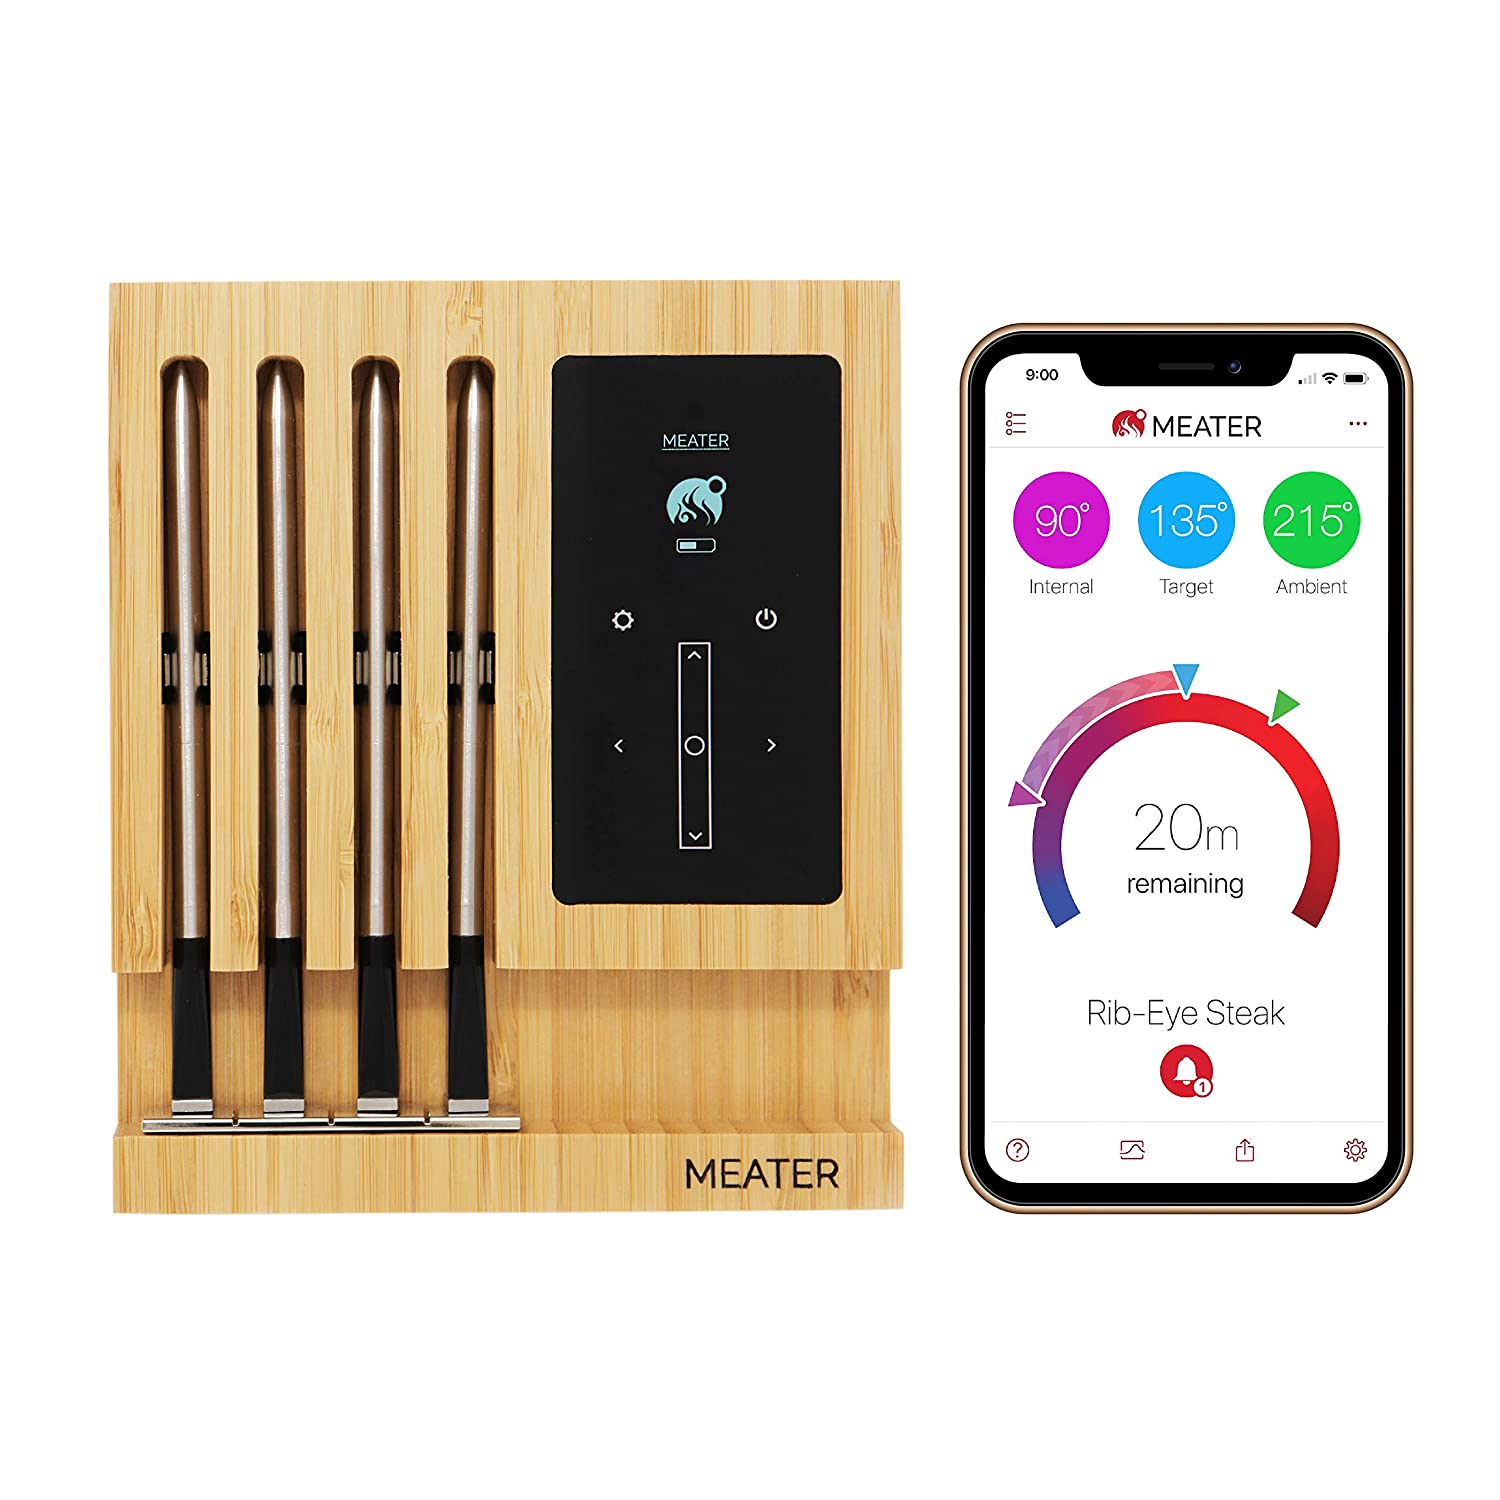 MEATER Block: 4-Probe Premium WiFi Smart Meat Thermometer | for BBQ, Oven, Grill, Kitchen, Smoker, Rotisserie $180